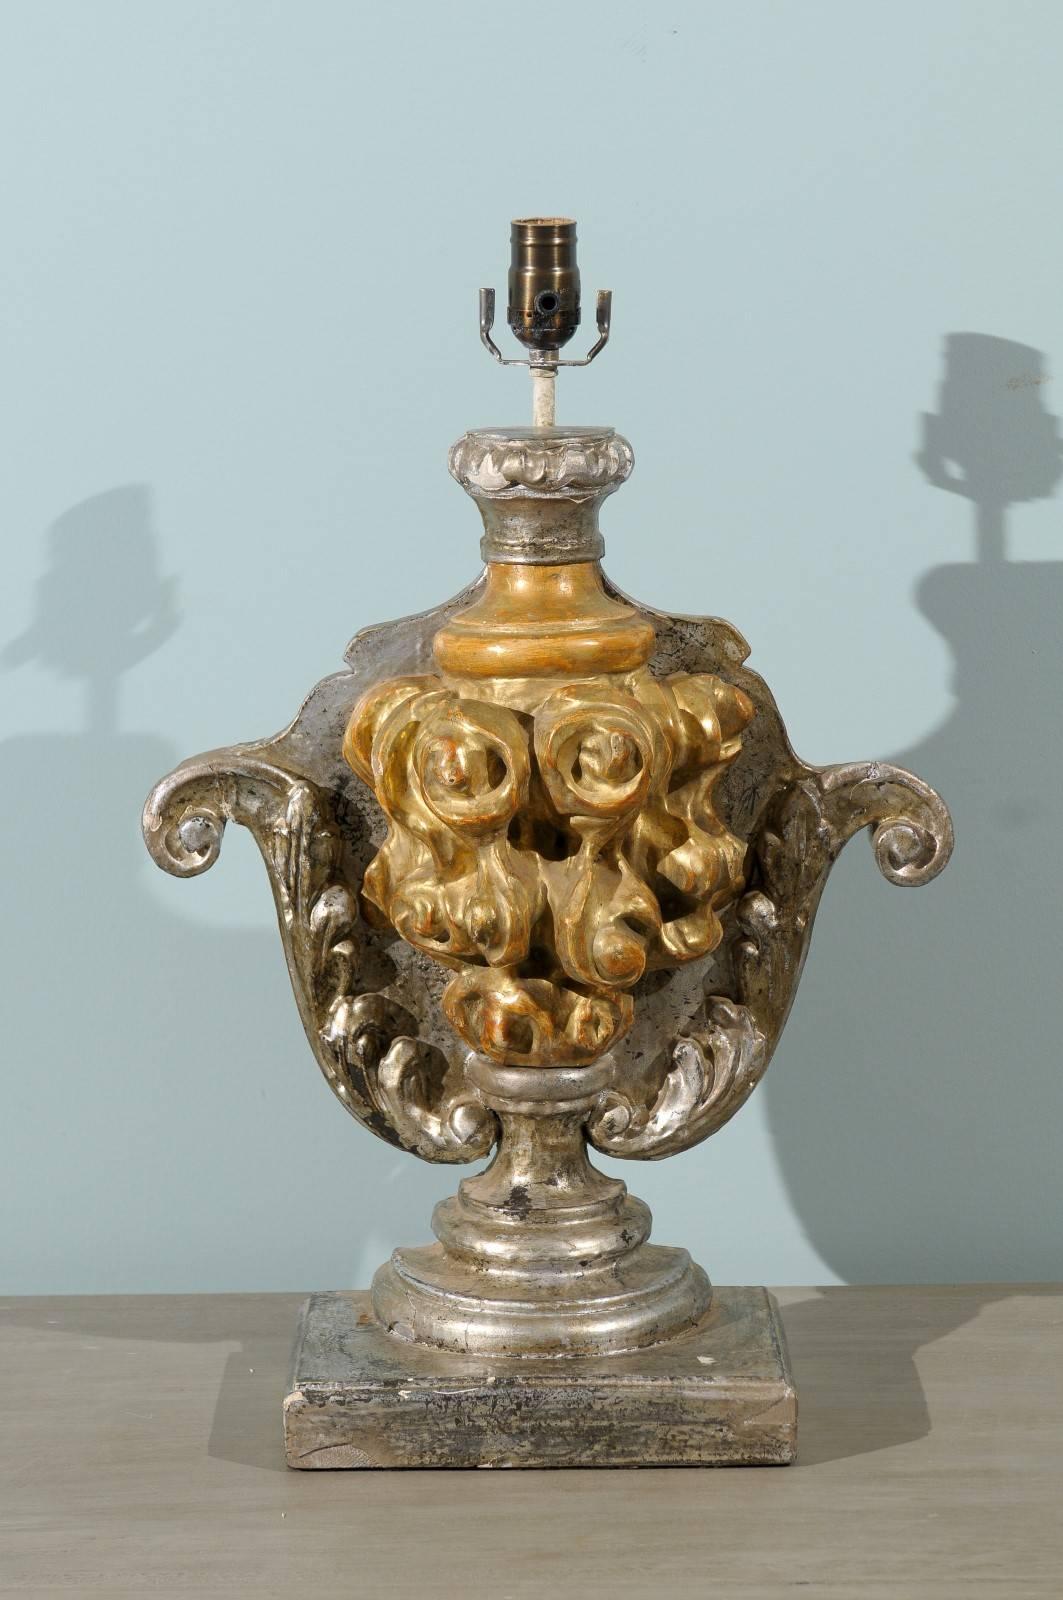 A single Italian table lamp from the 19th century. This Italian gilded table lamps is adorned with a fire pot gilded motif standing out from the silver gilded background with volutes and foliage motif on each side. The lamp is raised on a